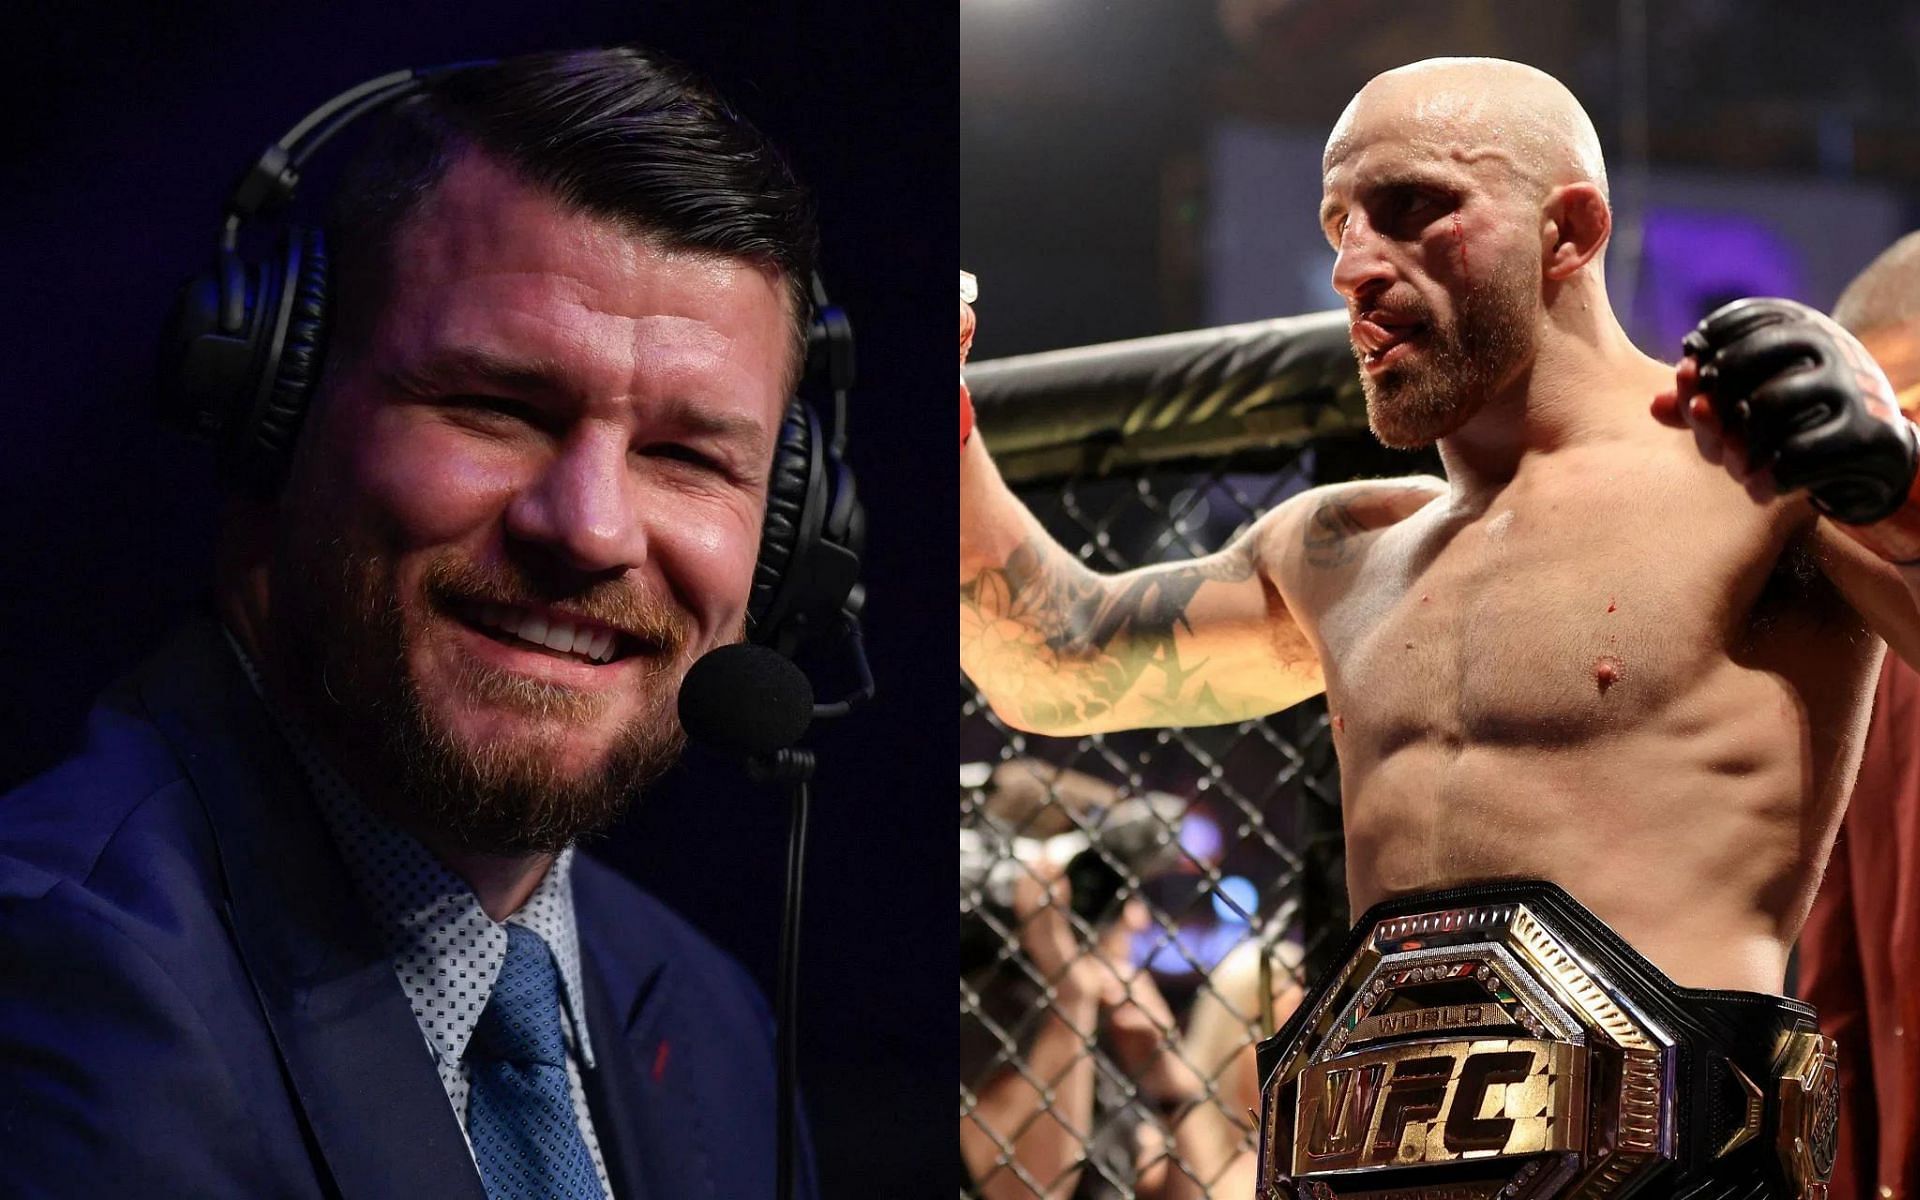 Michael Bisping (Left) and Alexander Volkanovski (Right) (Images courtesy of Getty)